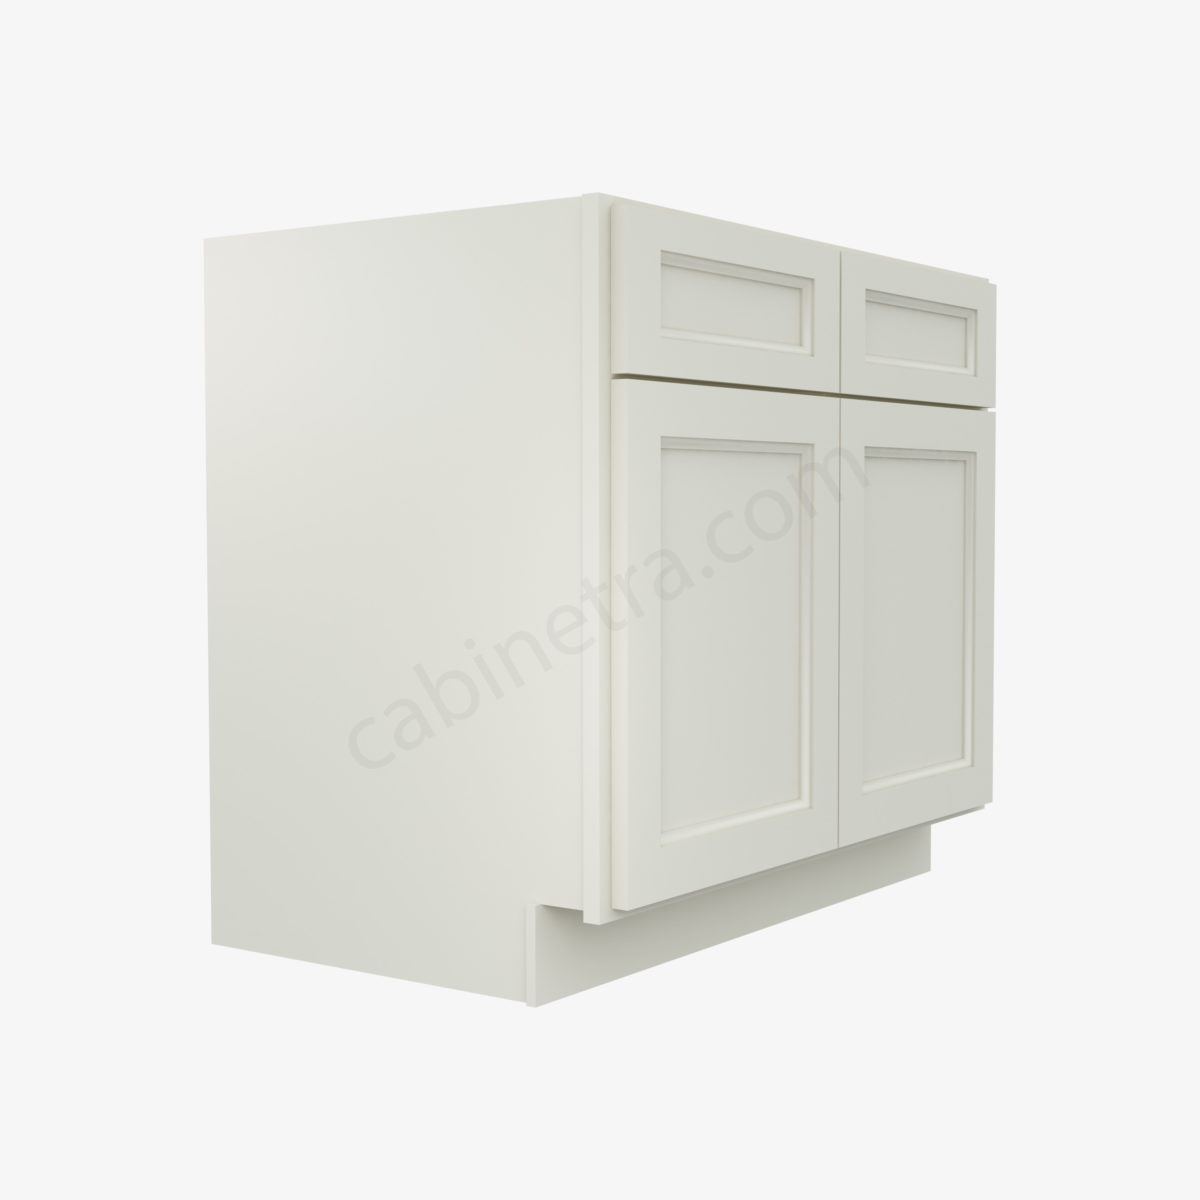 TQ B36B 4 Forevermark Townplace Crema Cabinetra scaled